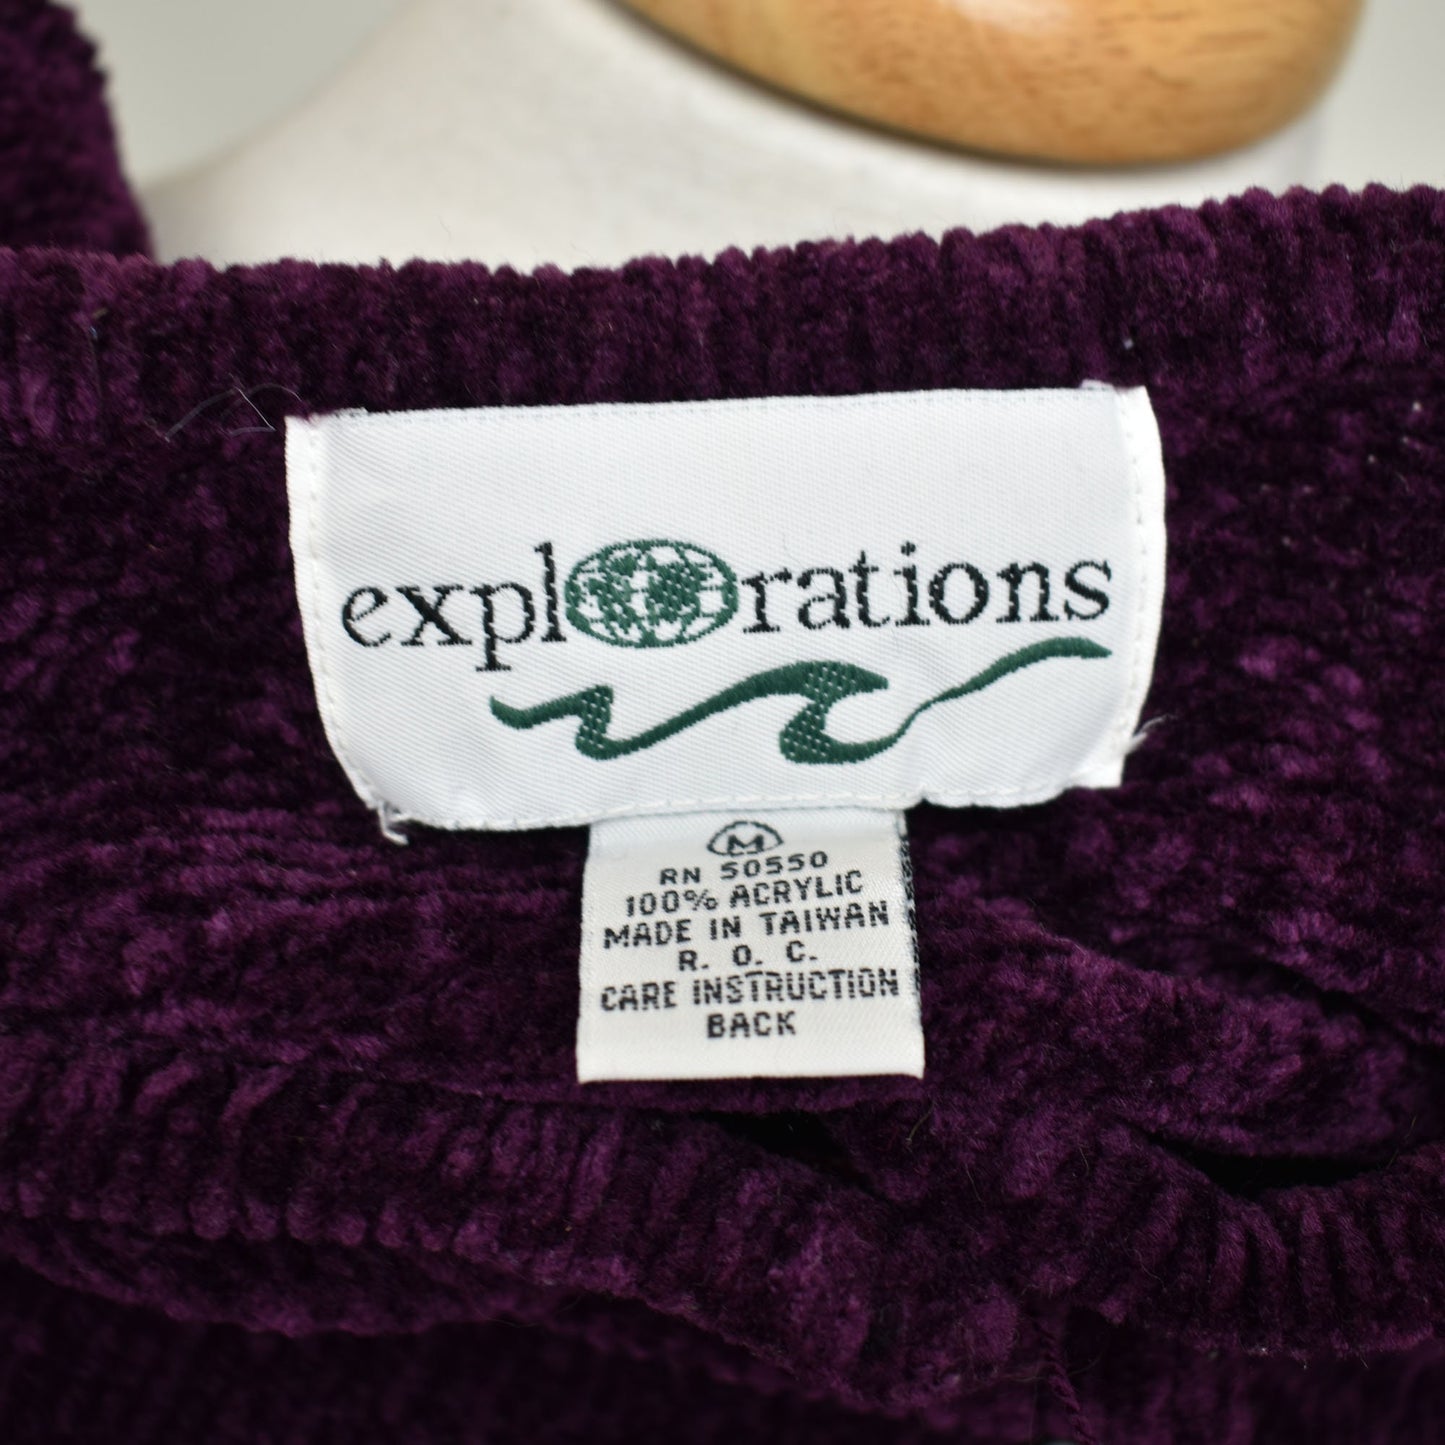 Vintage 90s Chenille Cardigan Sweater in Plum by Exploration - Cropped Knit - Crop Top